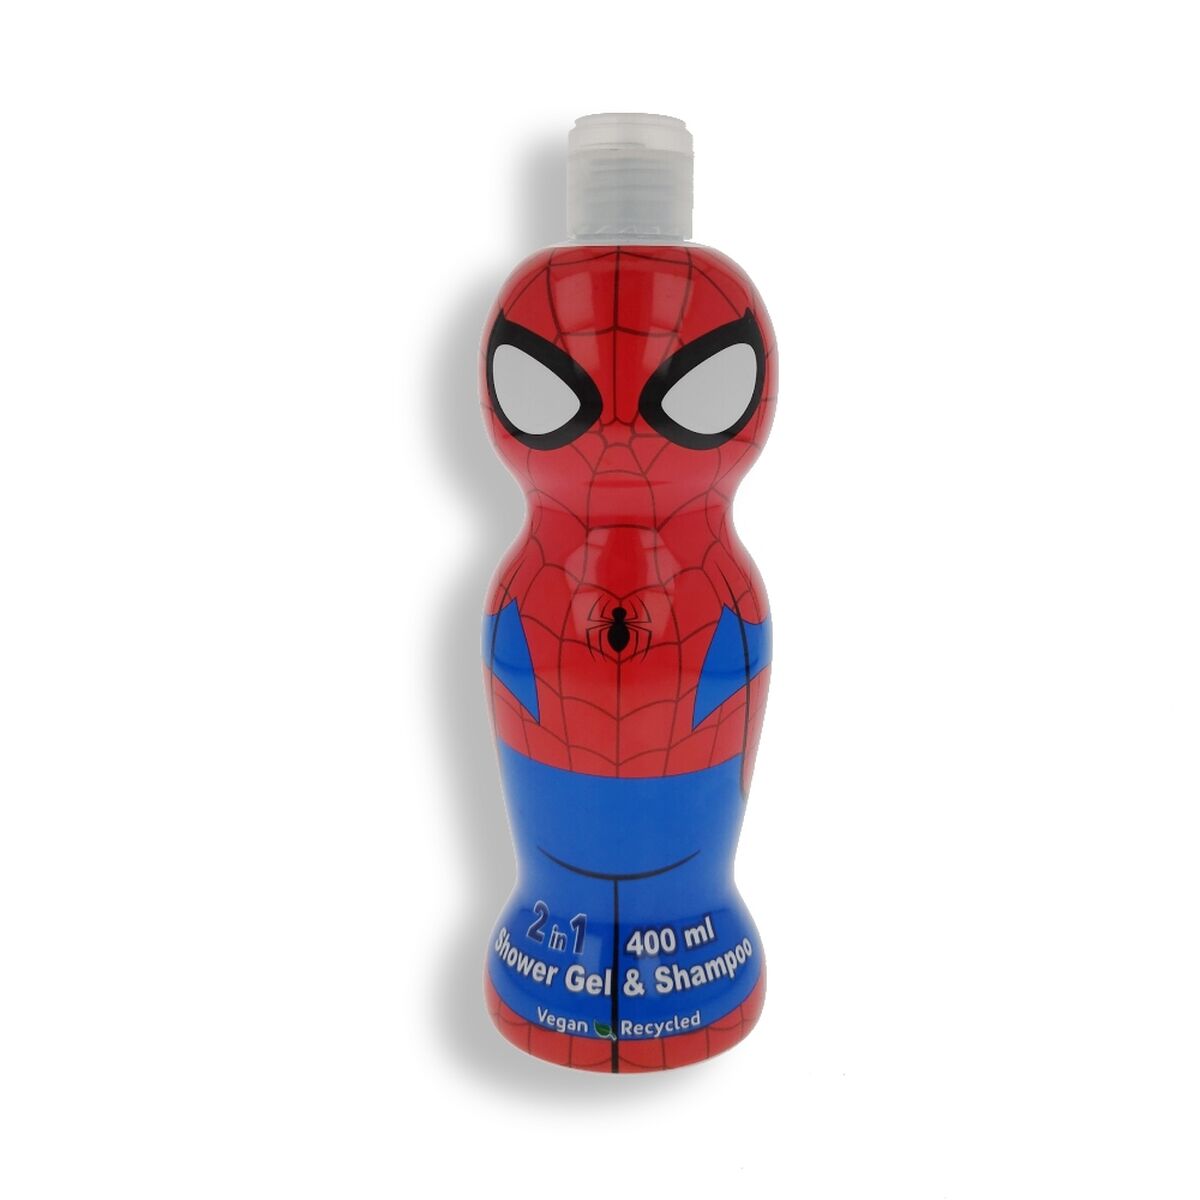 2-in-1 Gel and Shampoo Air-Val Spiderman 400 ml - Calm Beauty IE